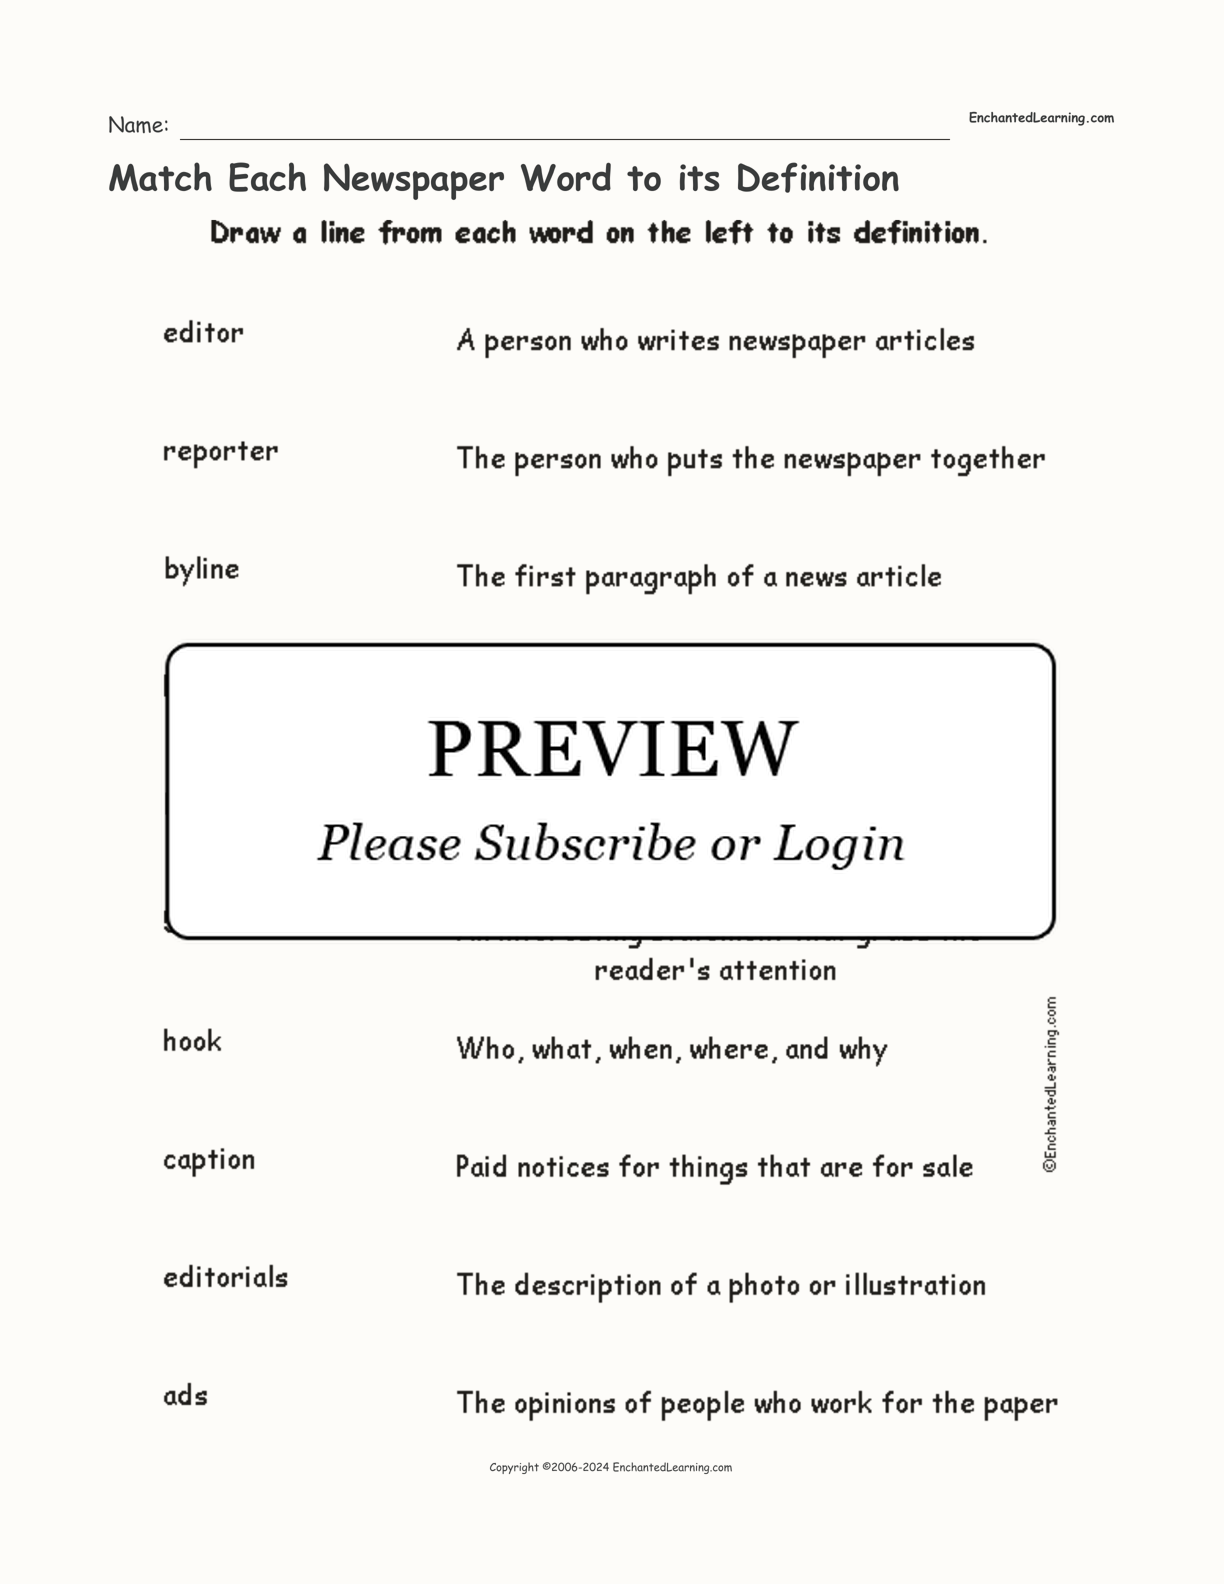 Match Each Newspaper Word to its Definition interactive worksheet page 1